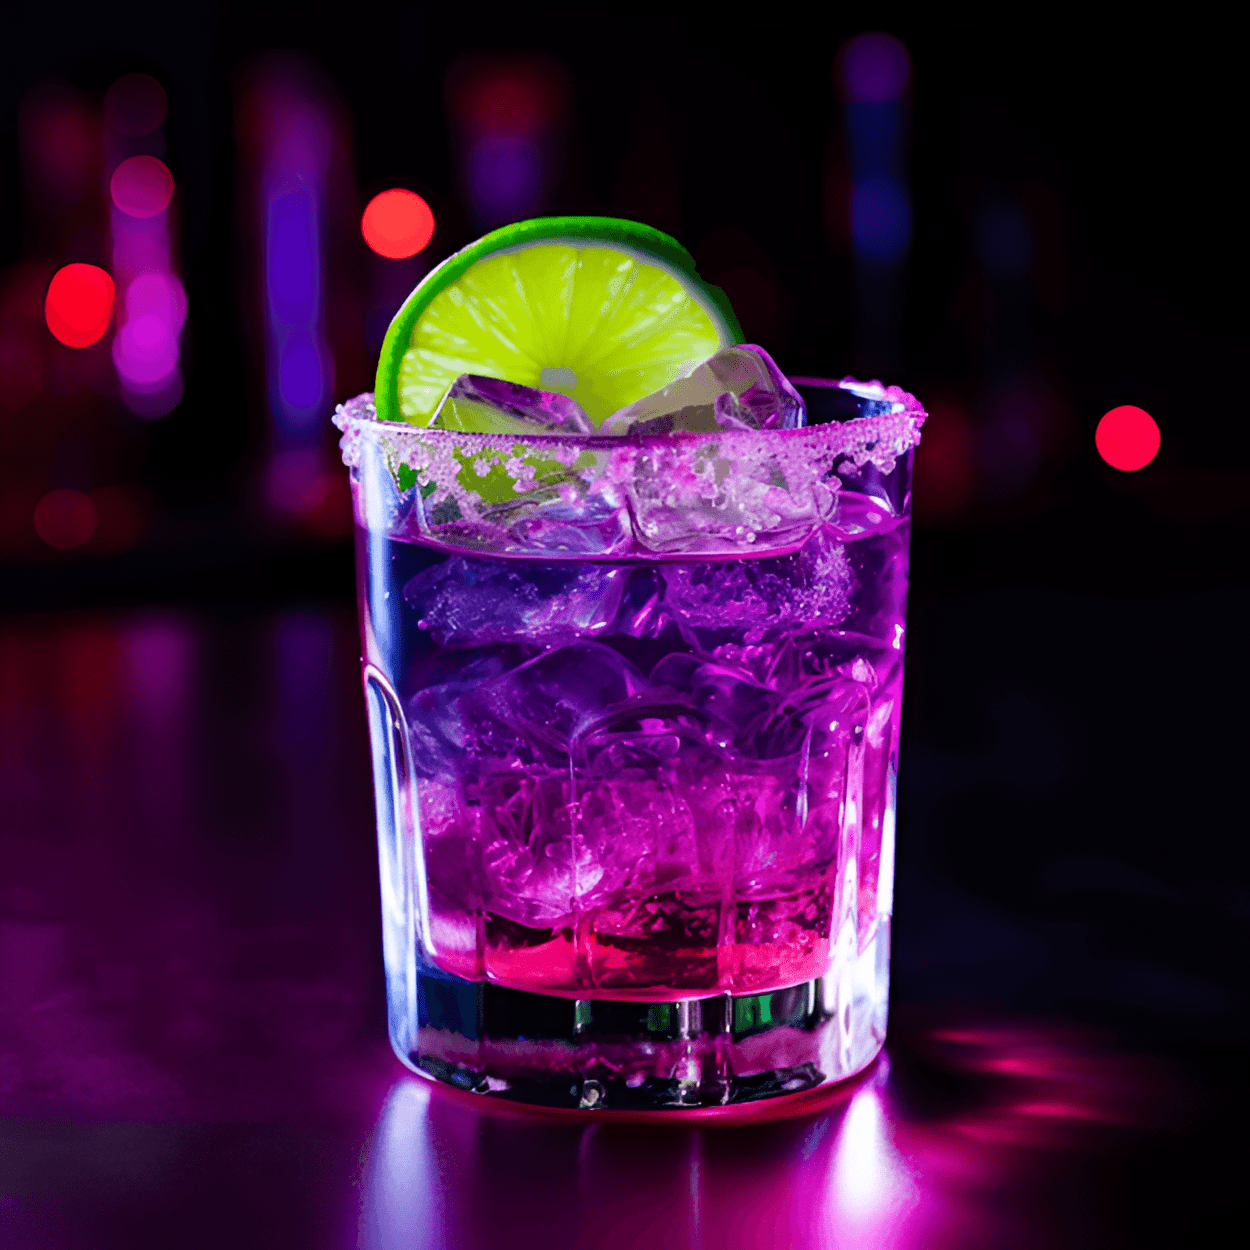 Purple Hooter Cocktail Recipe - The Purple Hooter has a sweet, fruity taste with a hint of tartness from the lime juice. The raspberry liqueur gives it a rich, berry flavor, while the vodka adds a bit of a kick. It's a light, refreshing cocktail that's perfect for sipping on a hot summer day.